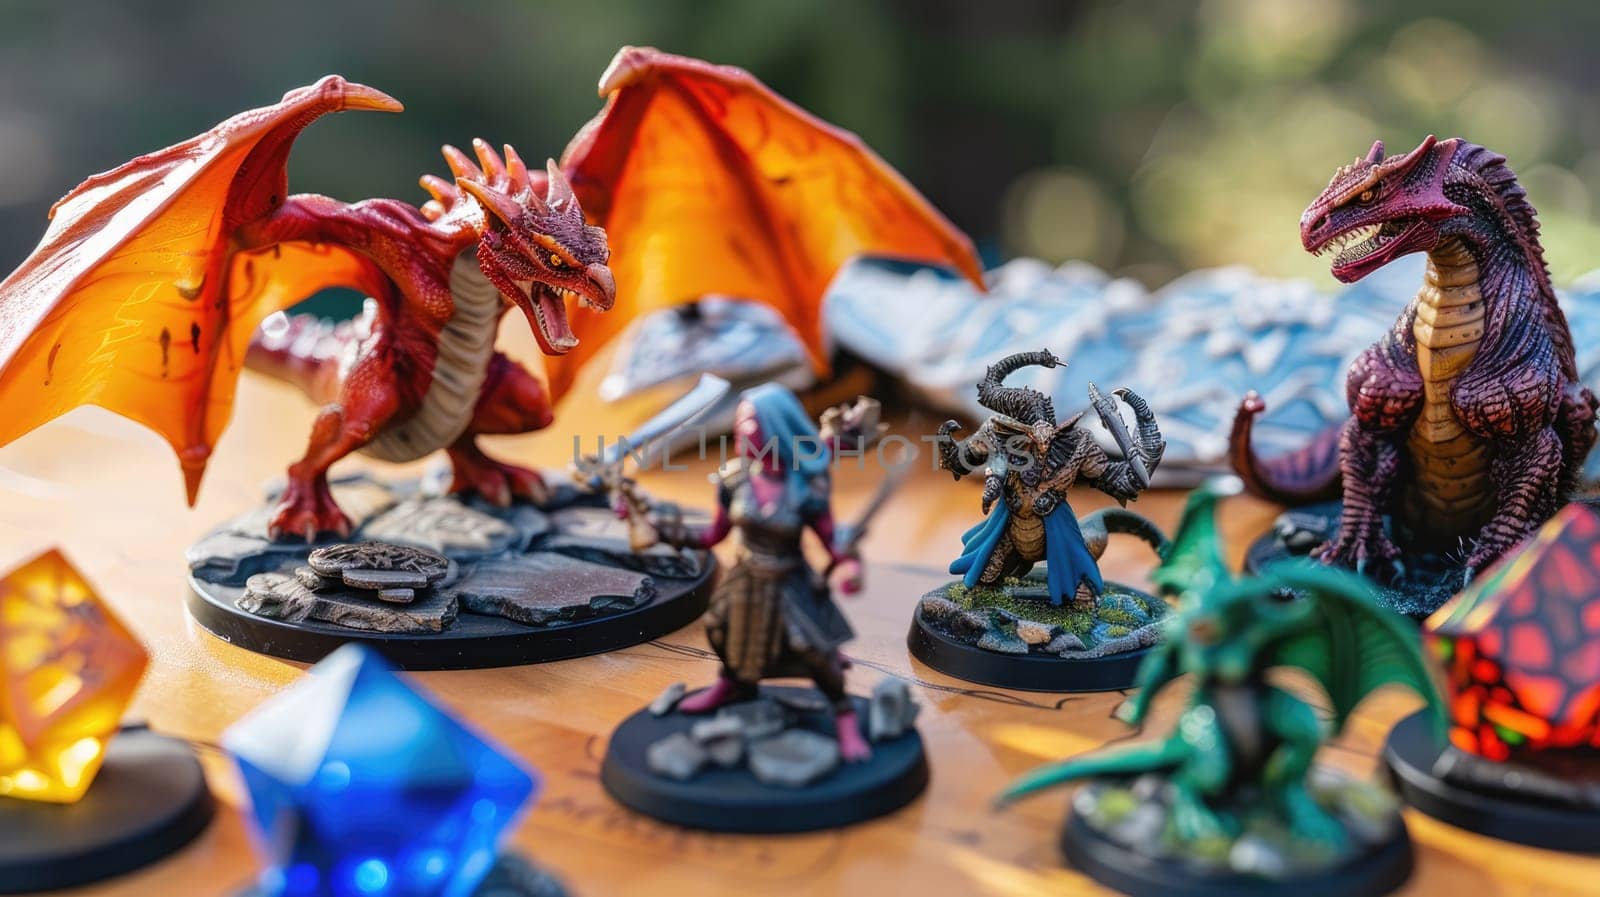 DND figures with various characters and fantasy creatures. by natali_brill